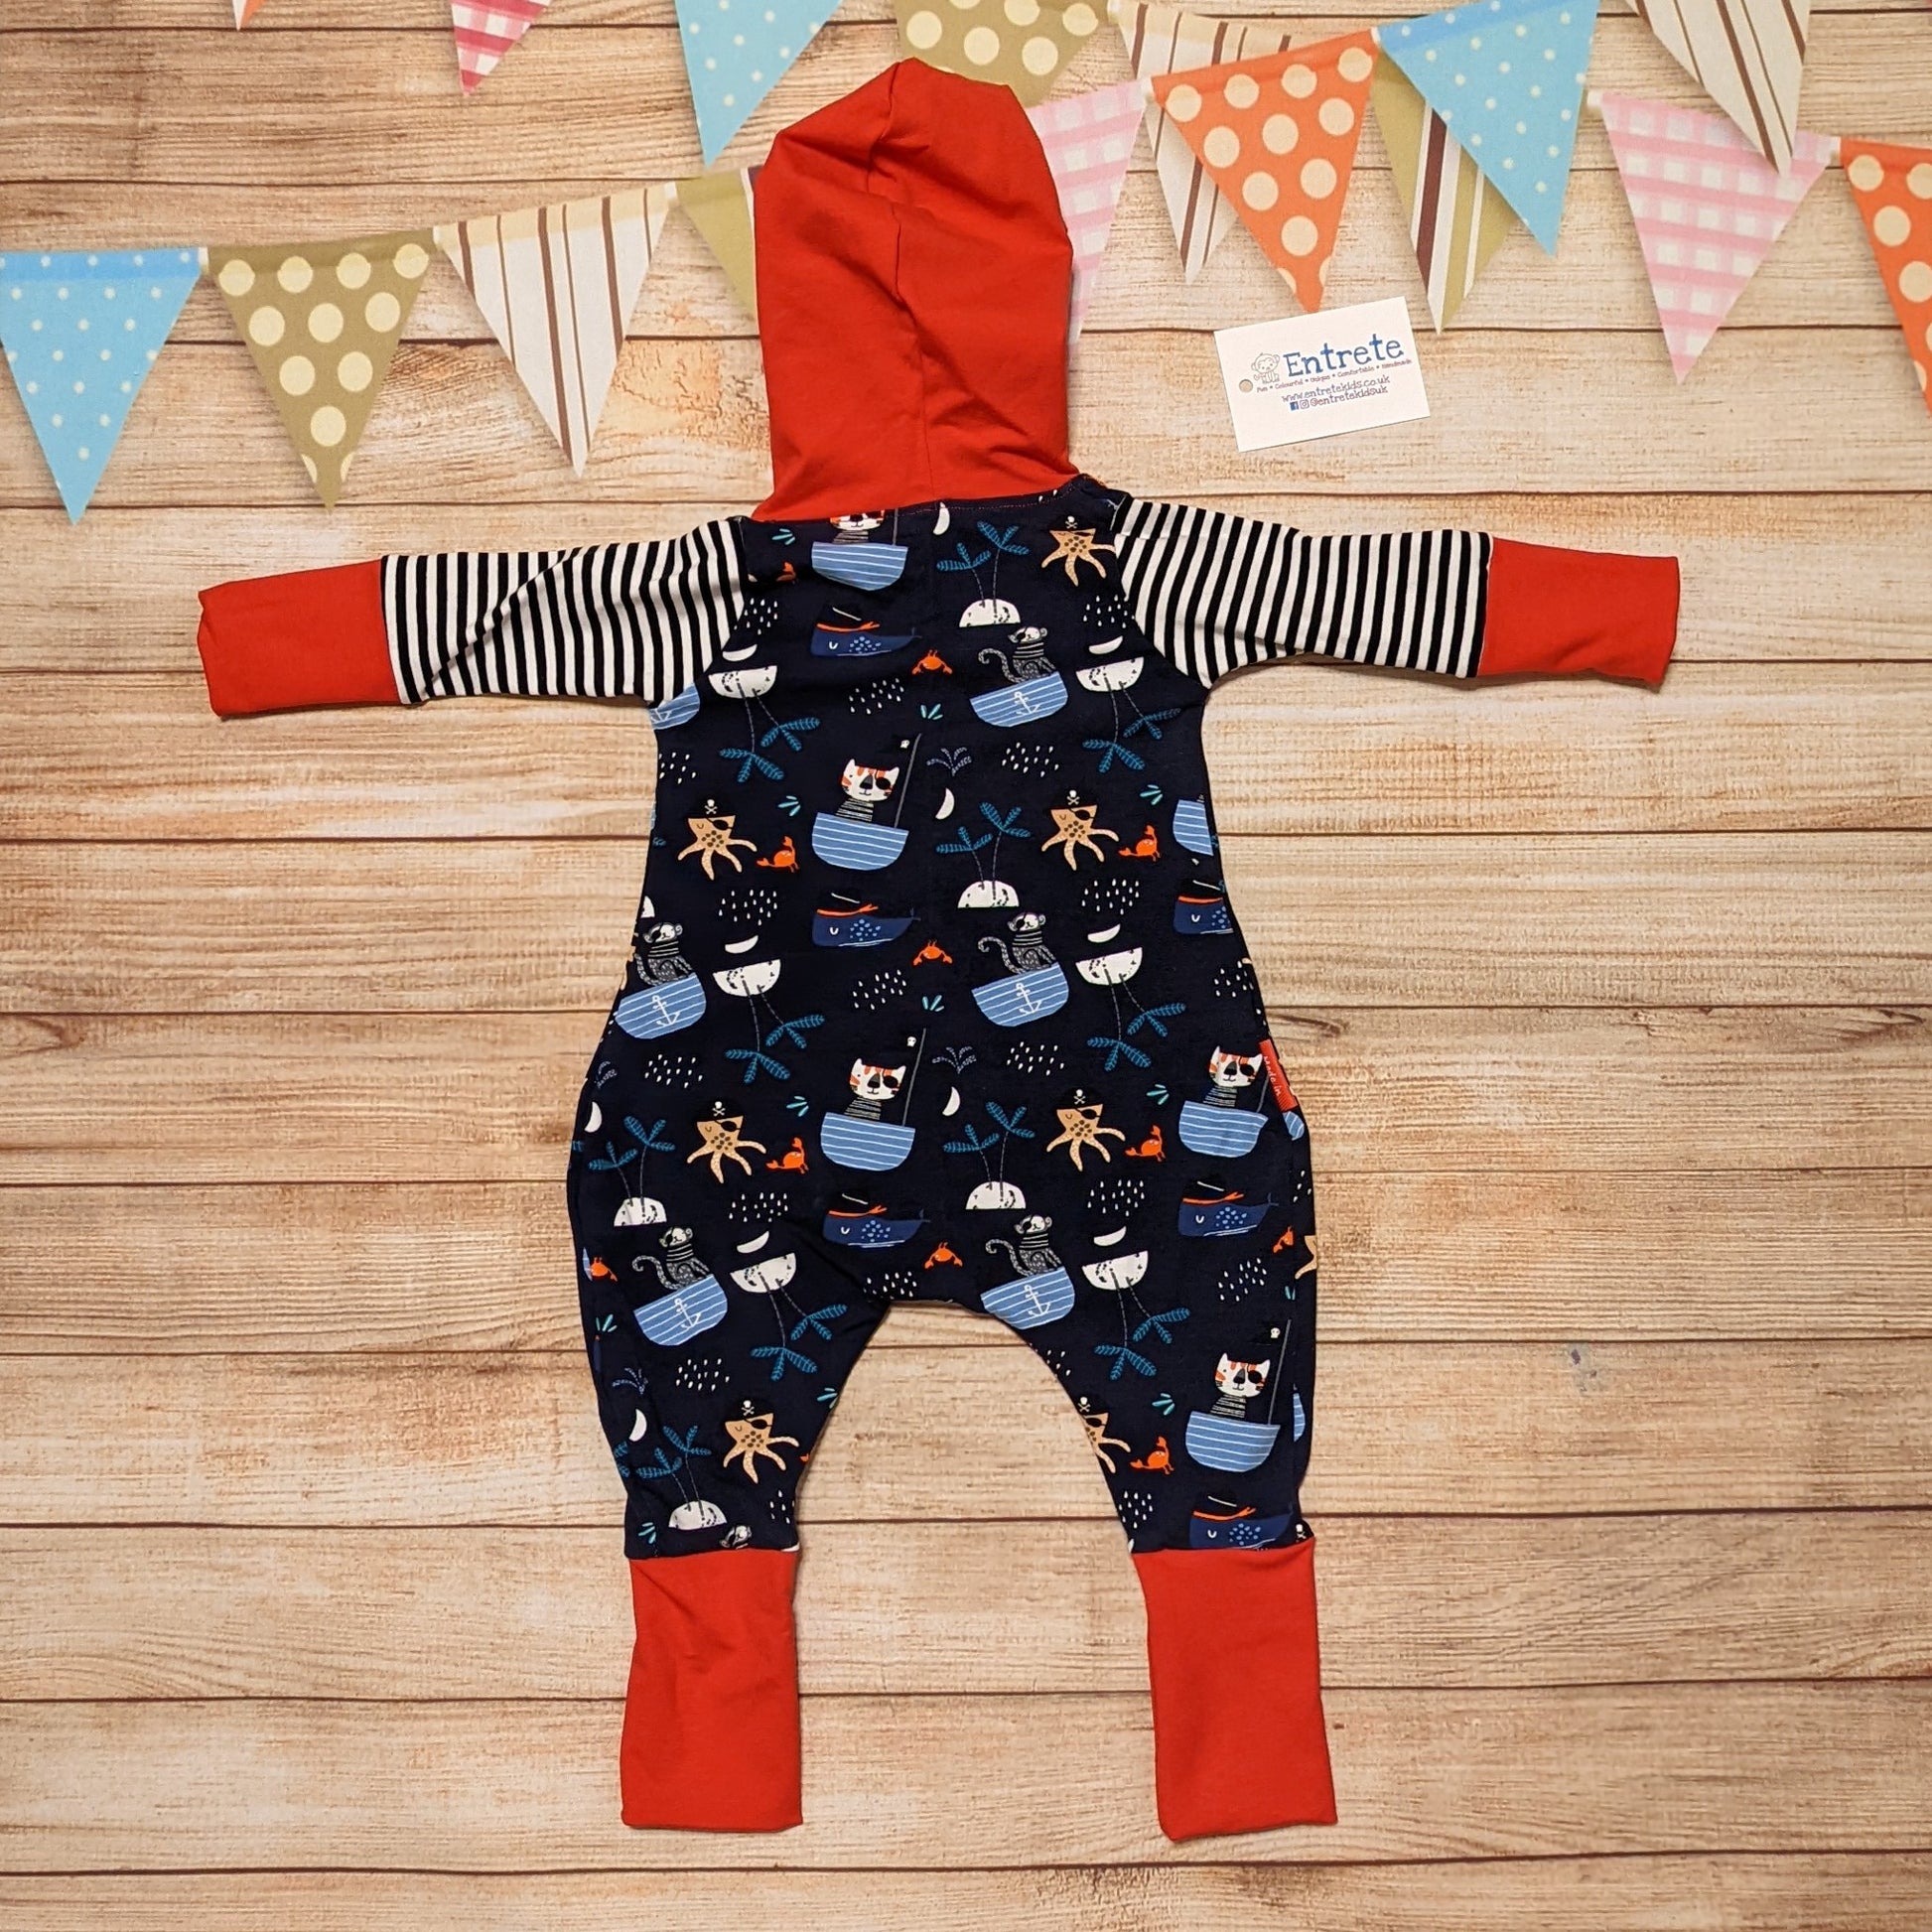 Fun and adventure await, with the awesome pirate cats hooded romper. Shown from the rear. Handmade using pirate cats, red and monochrome striped cotton jersey's.